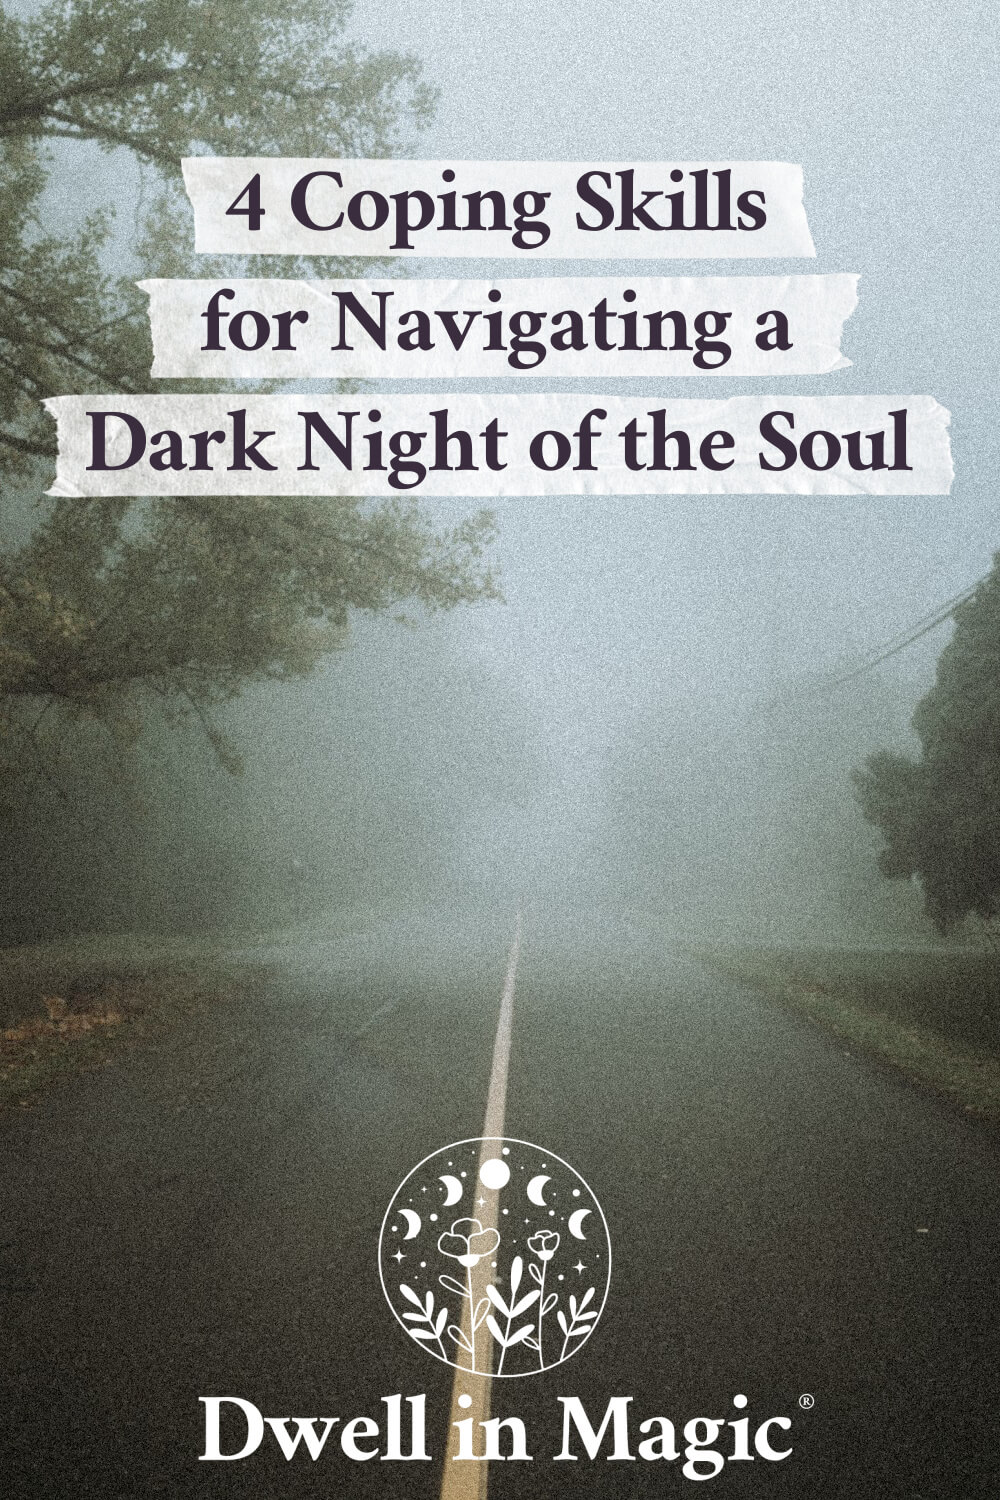 4 helpful coping skills for navigating a dark night of the soul.